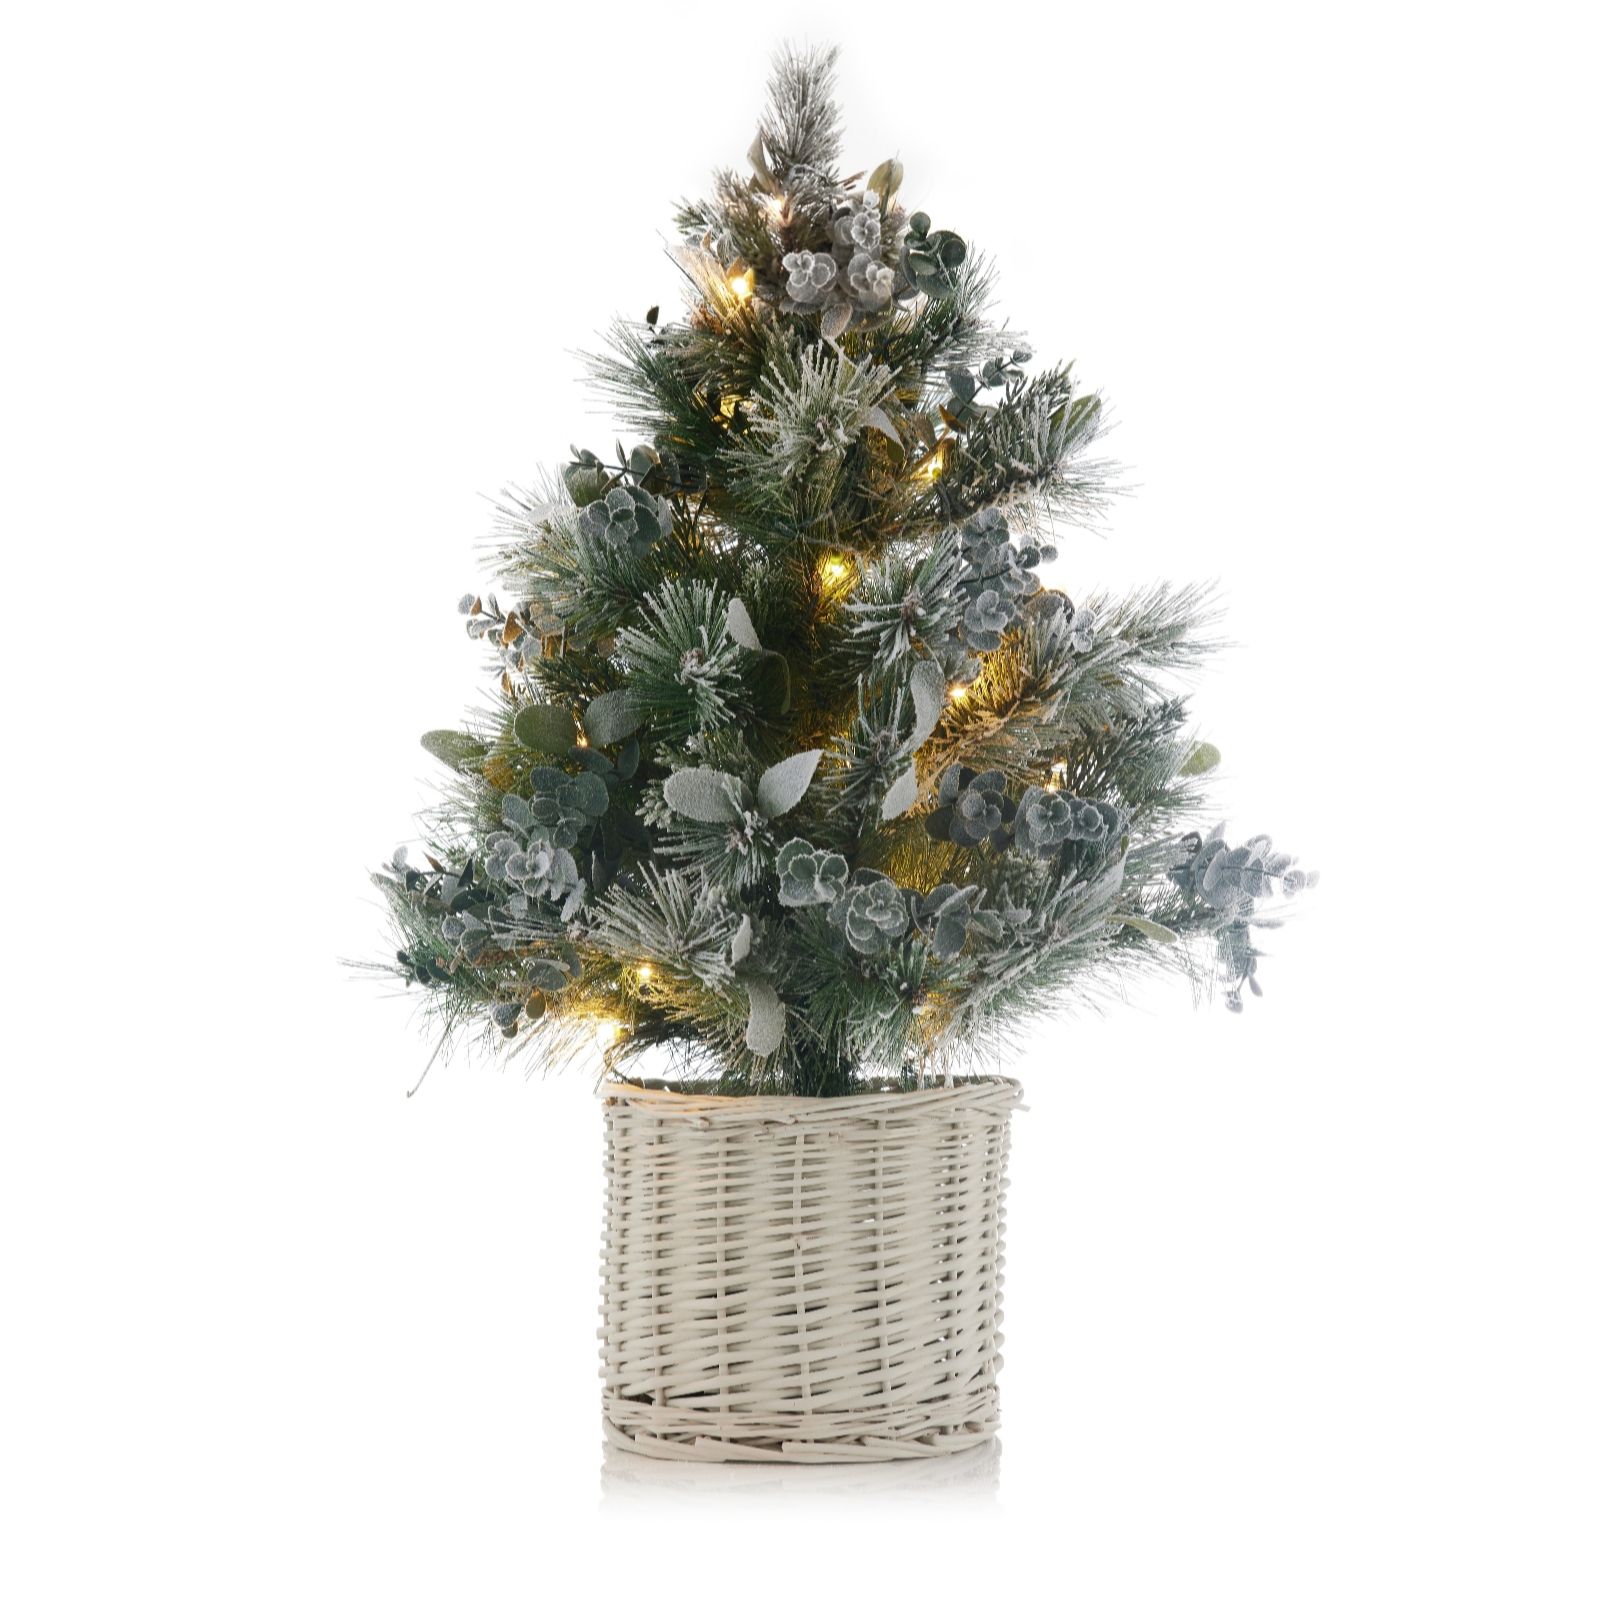 K by Kelly Hoppen Cotswolds Choice of Pre-Lit Greenery Christmas ...